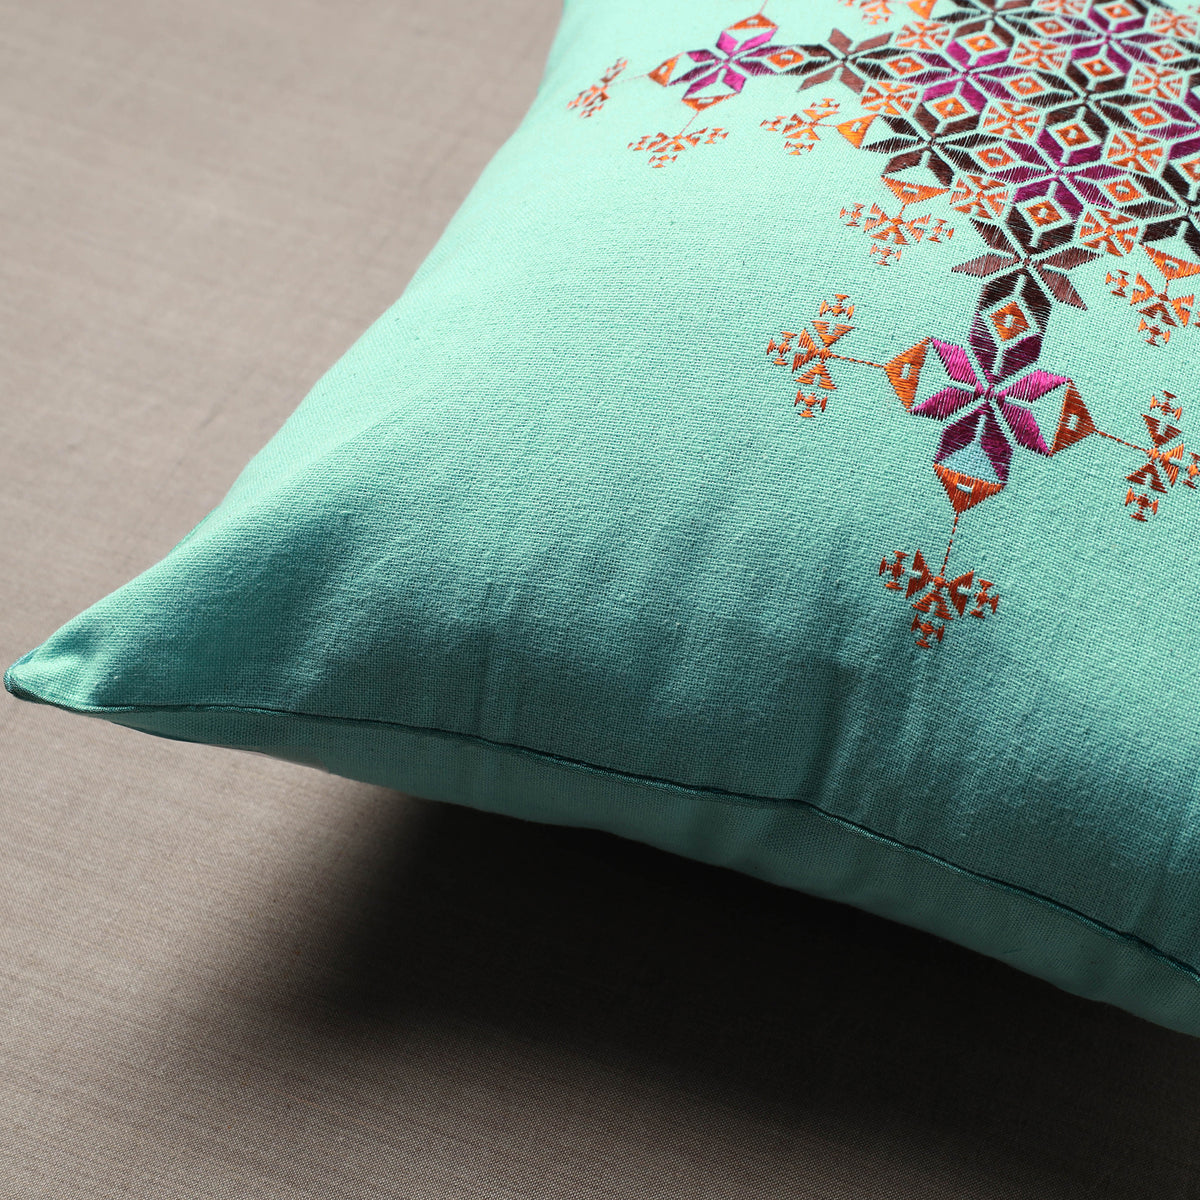 Soof Embroidery Cotton Cushion Cover (16 x 16 in)